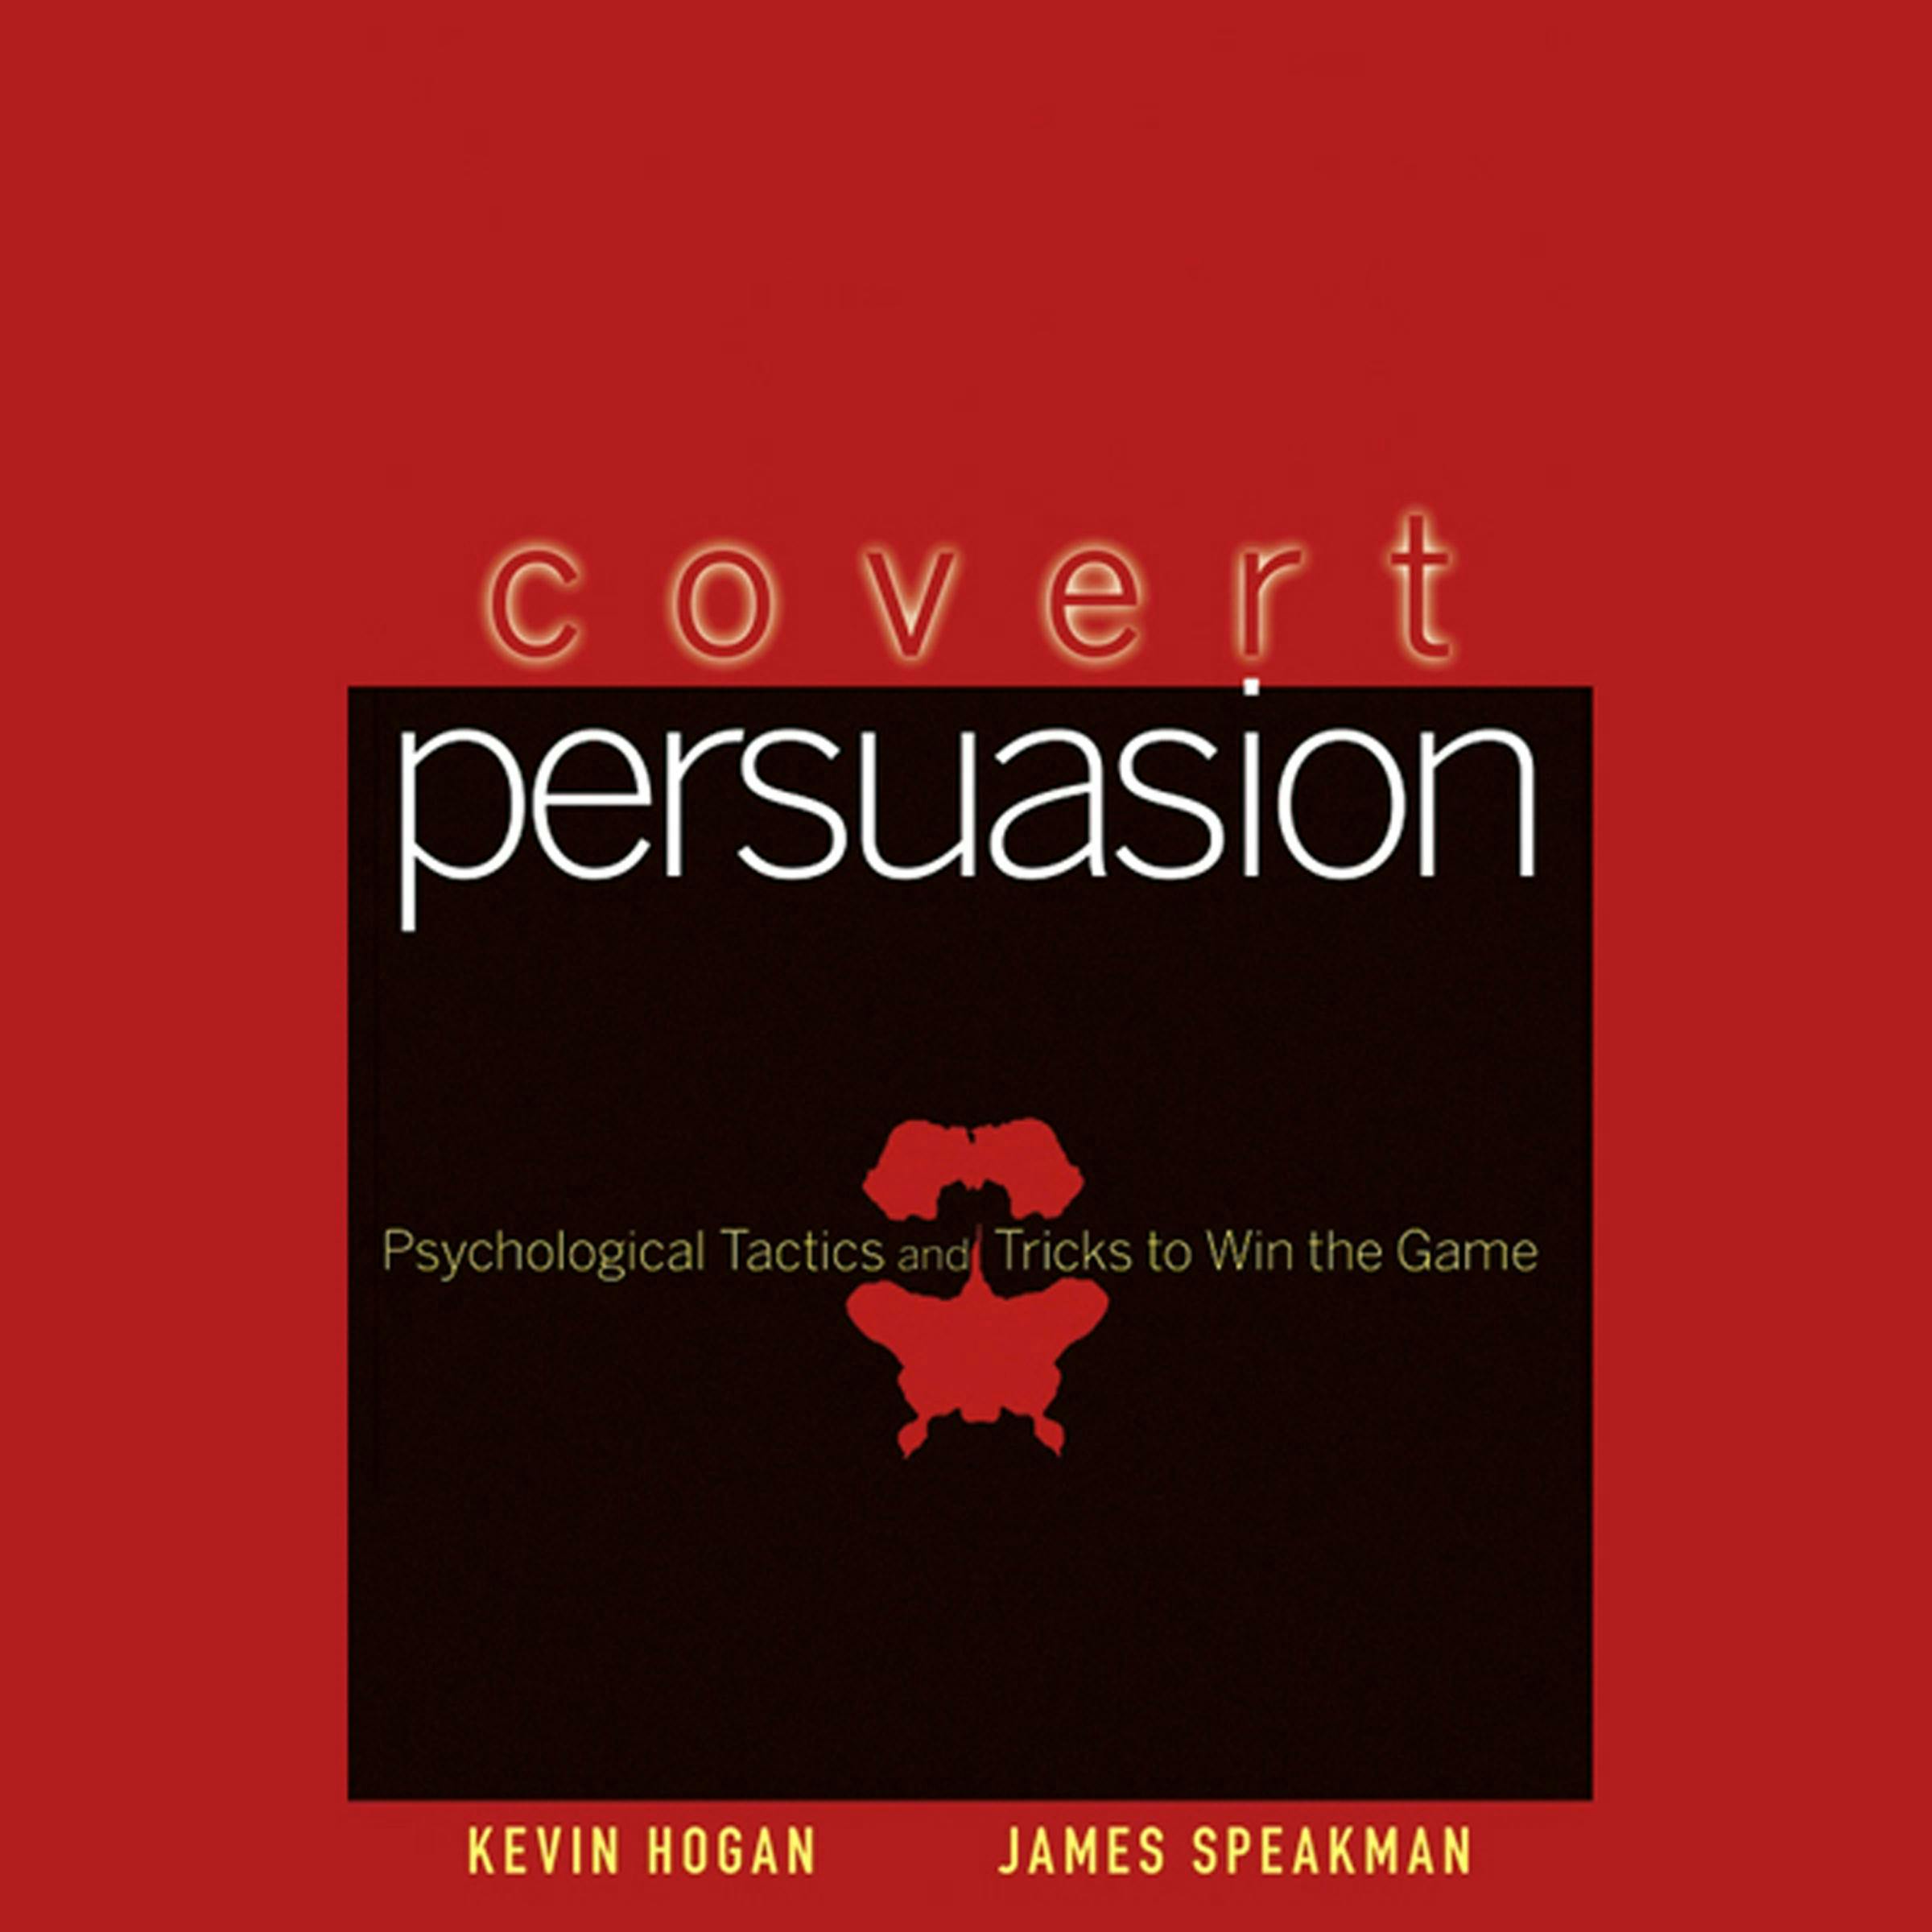 Covert Persuasion: Psychological Tactics and Tricks to Win the Game - Kevin Hogan, James Speakman